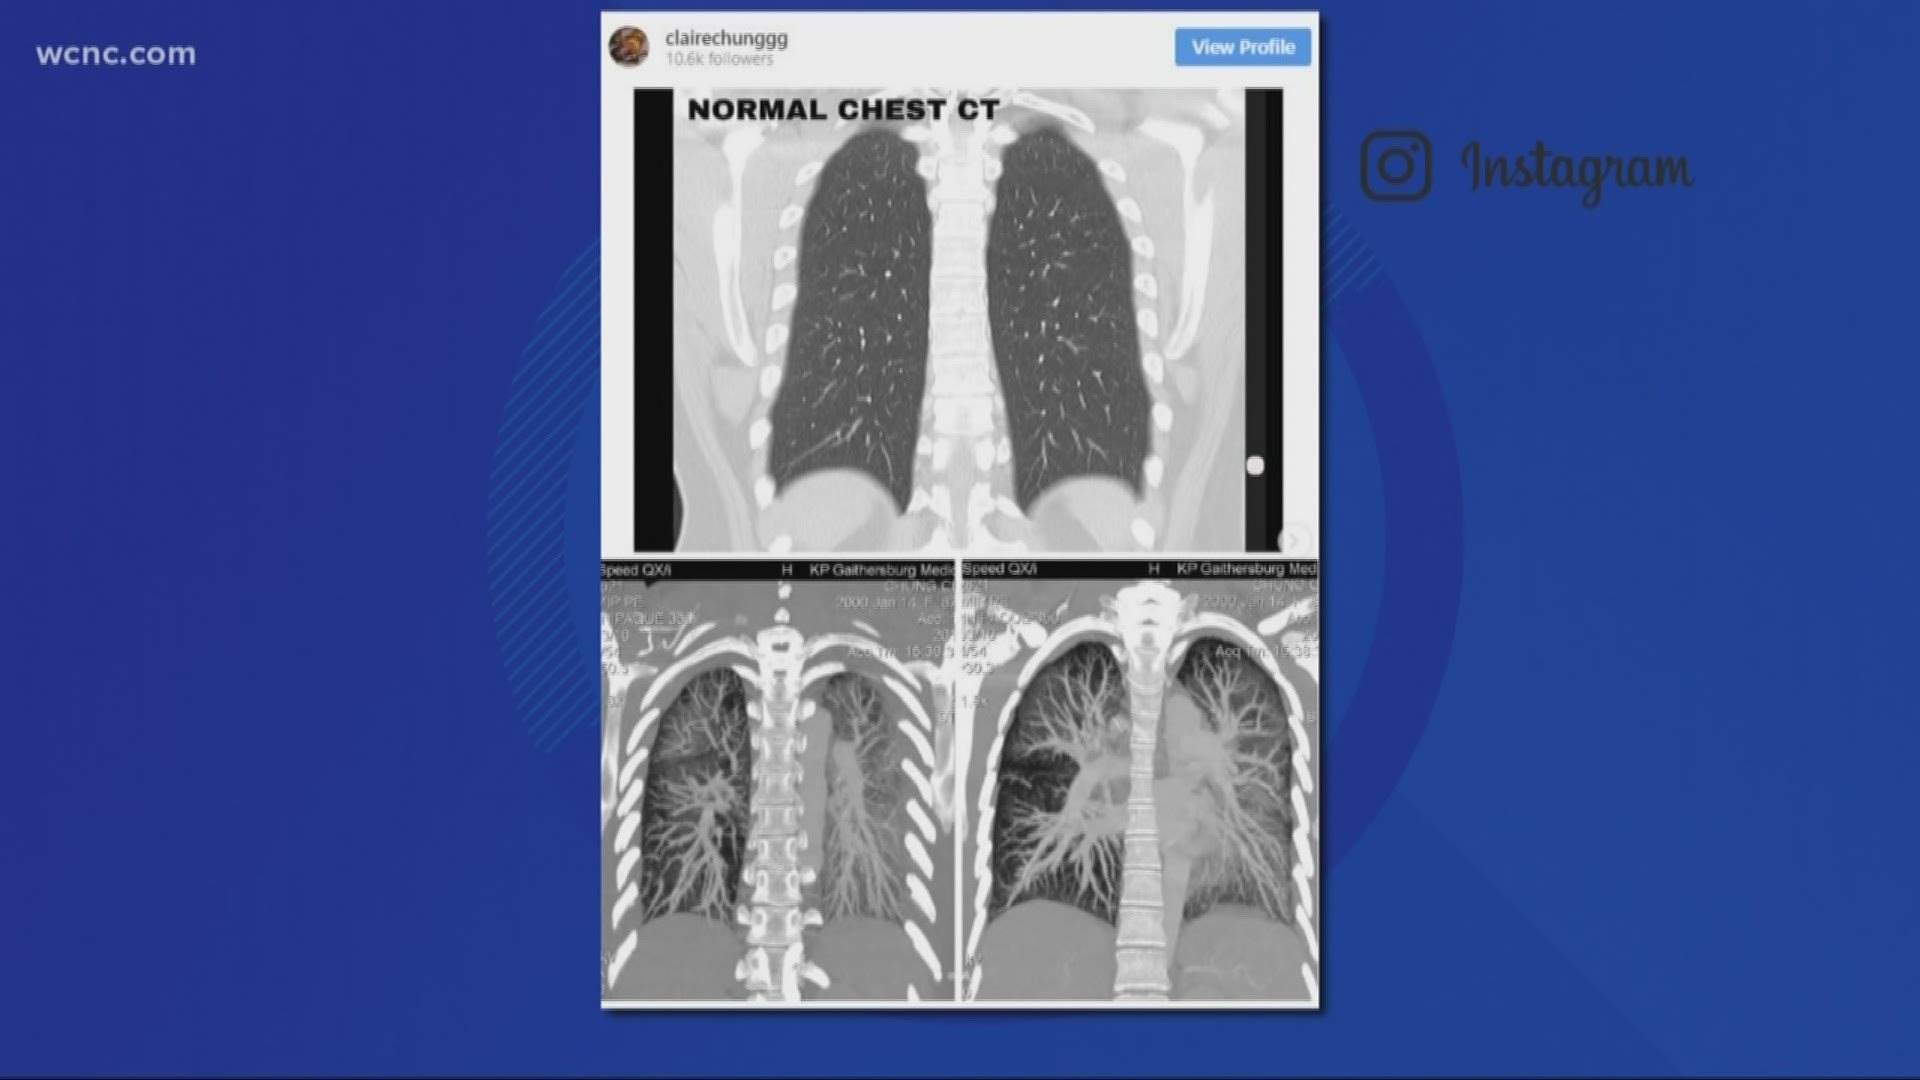 The teenager posted alleged pictures of CT scans that showed the negative effects of vaping.